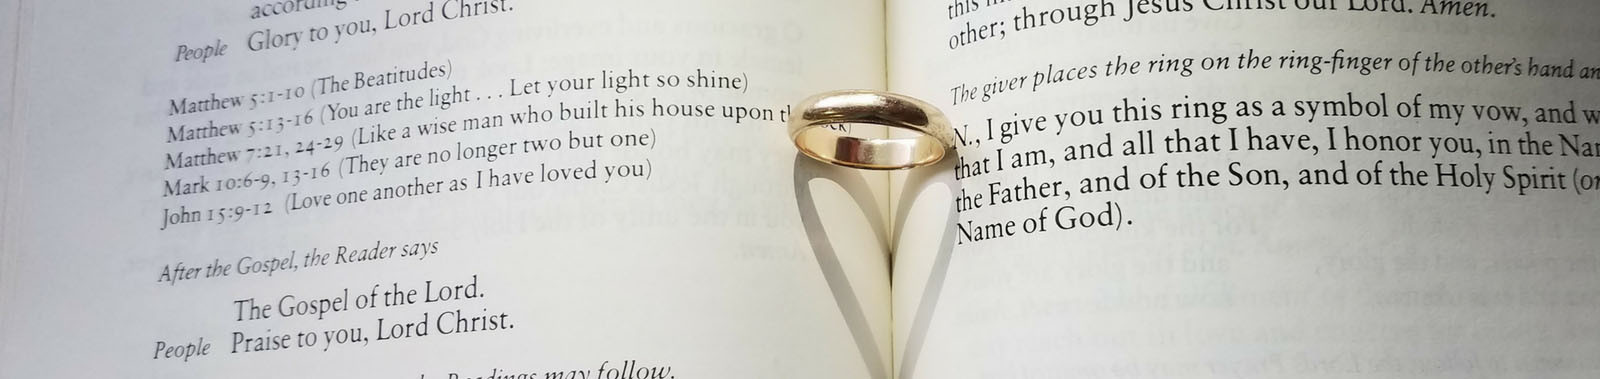 Book Of Common Prayer Wedding Vows
 Marriage in The Episcopal Church Episcopal Diocese of